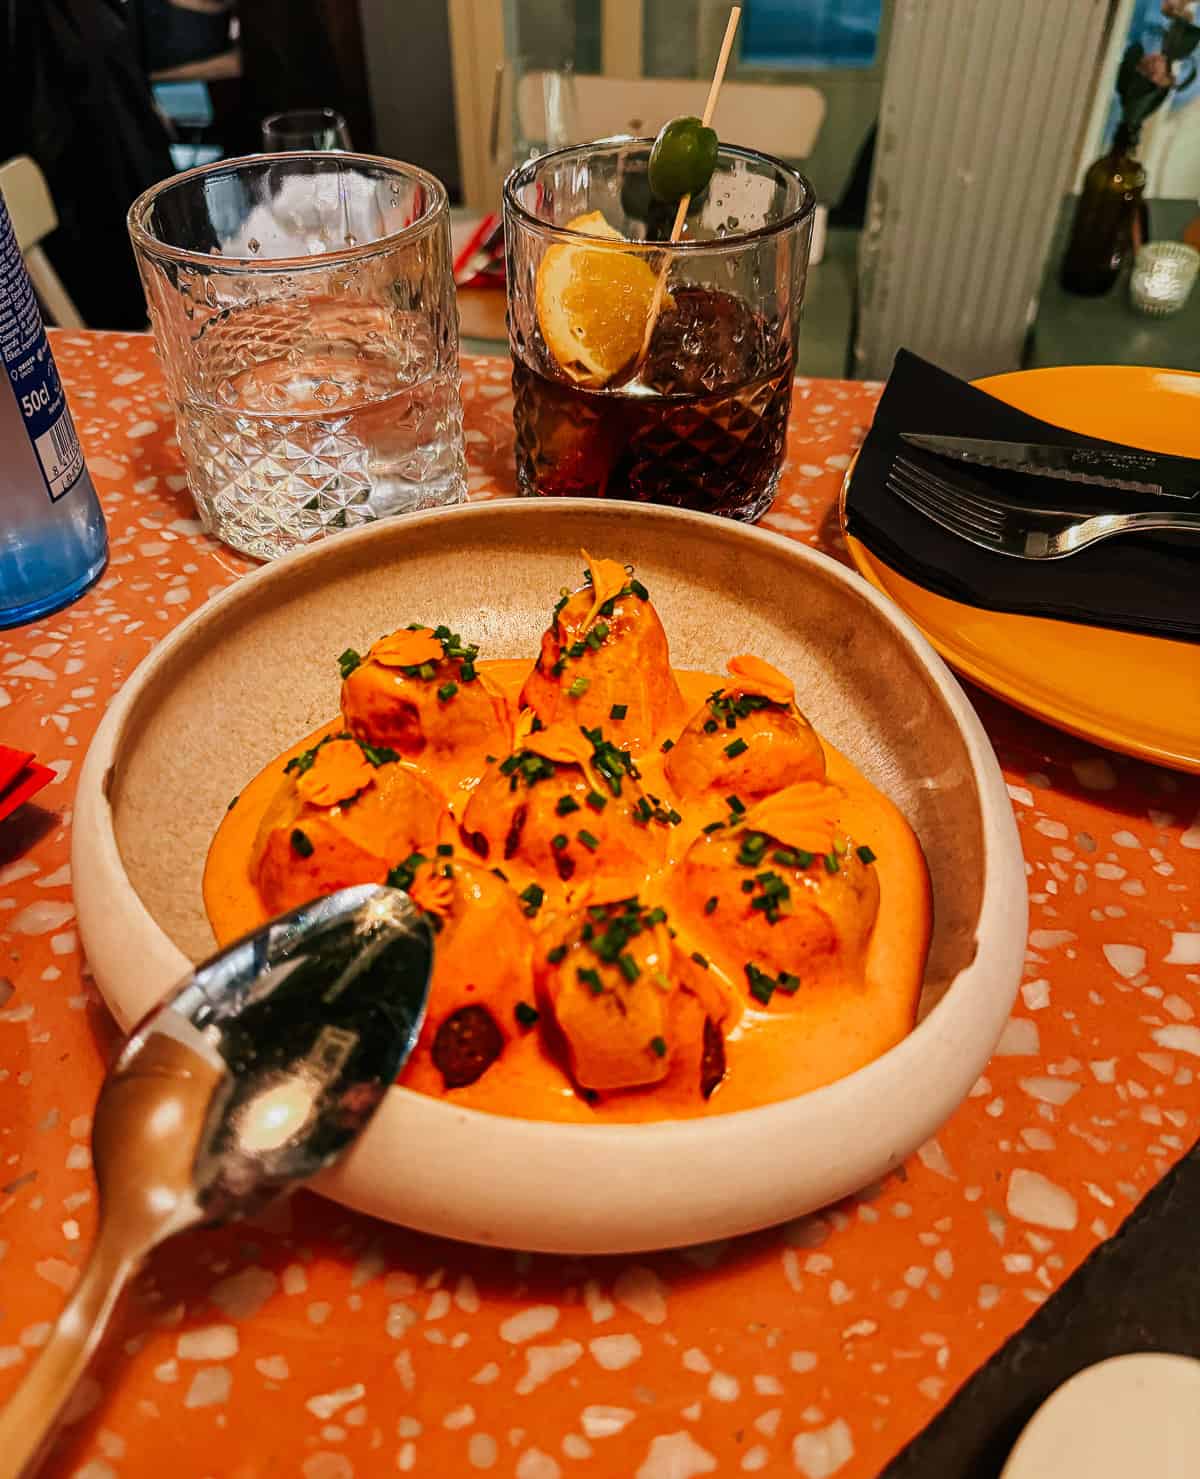 A dish of patatas bravas dressed in a creamy sauce on a terrazzo table, accompanied by a glass of water and cocktail, epitomizing a modern tapas experience.